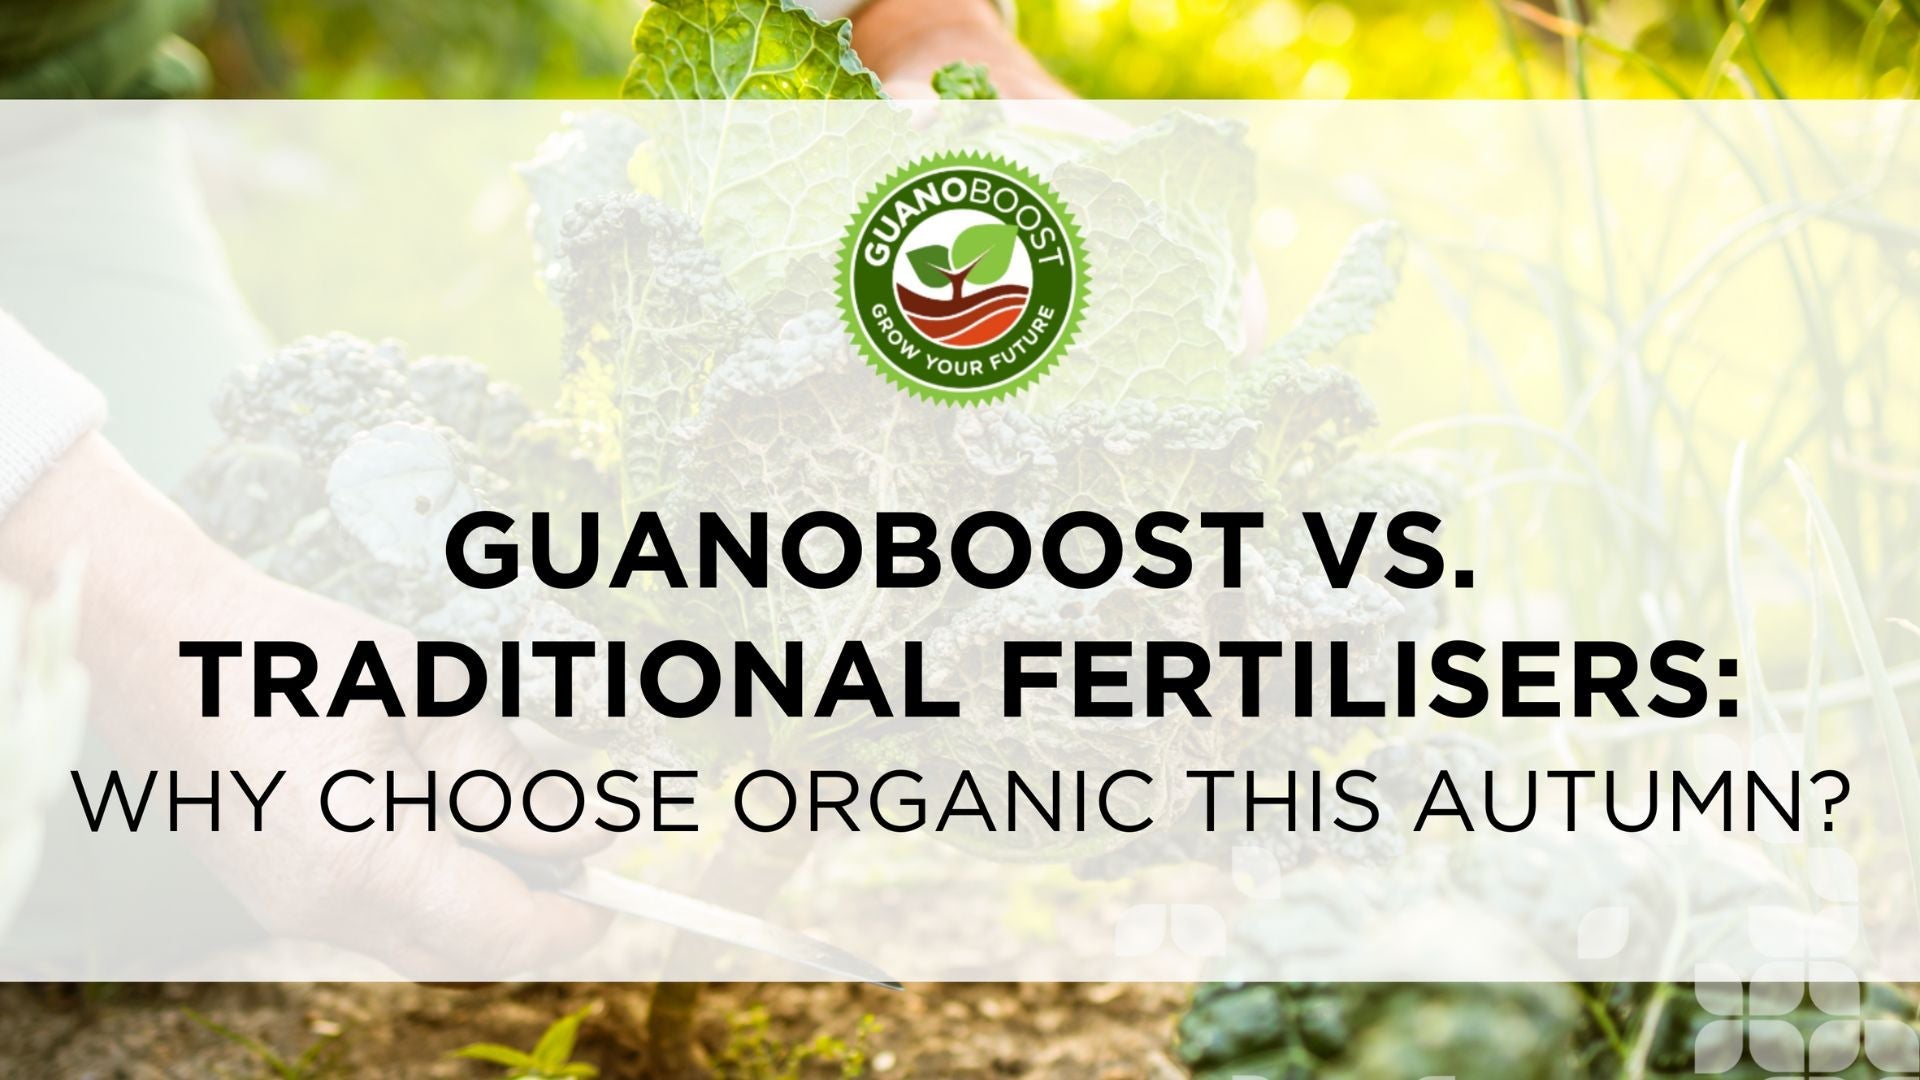 GuanoBoost vs. Traditional Fertilisers: Why Choose Organic This Autumn? - GuanoBoost